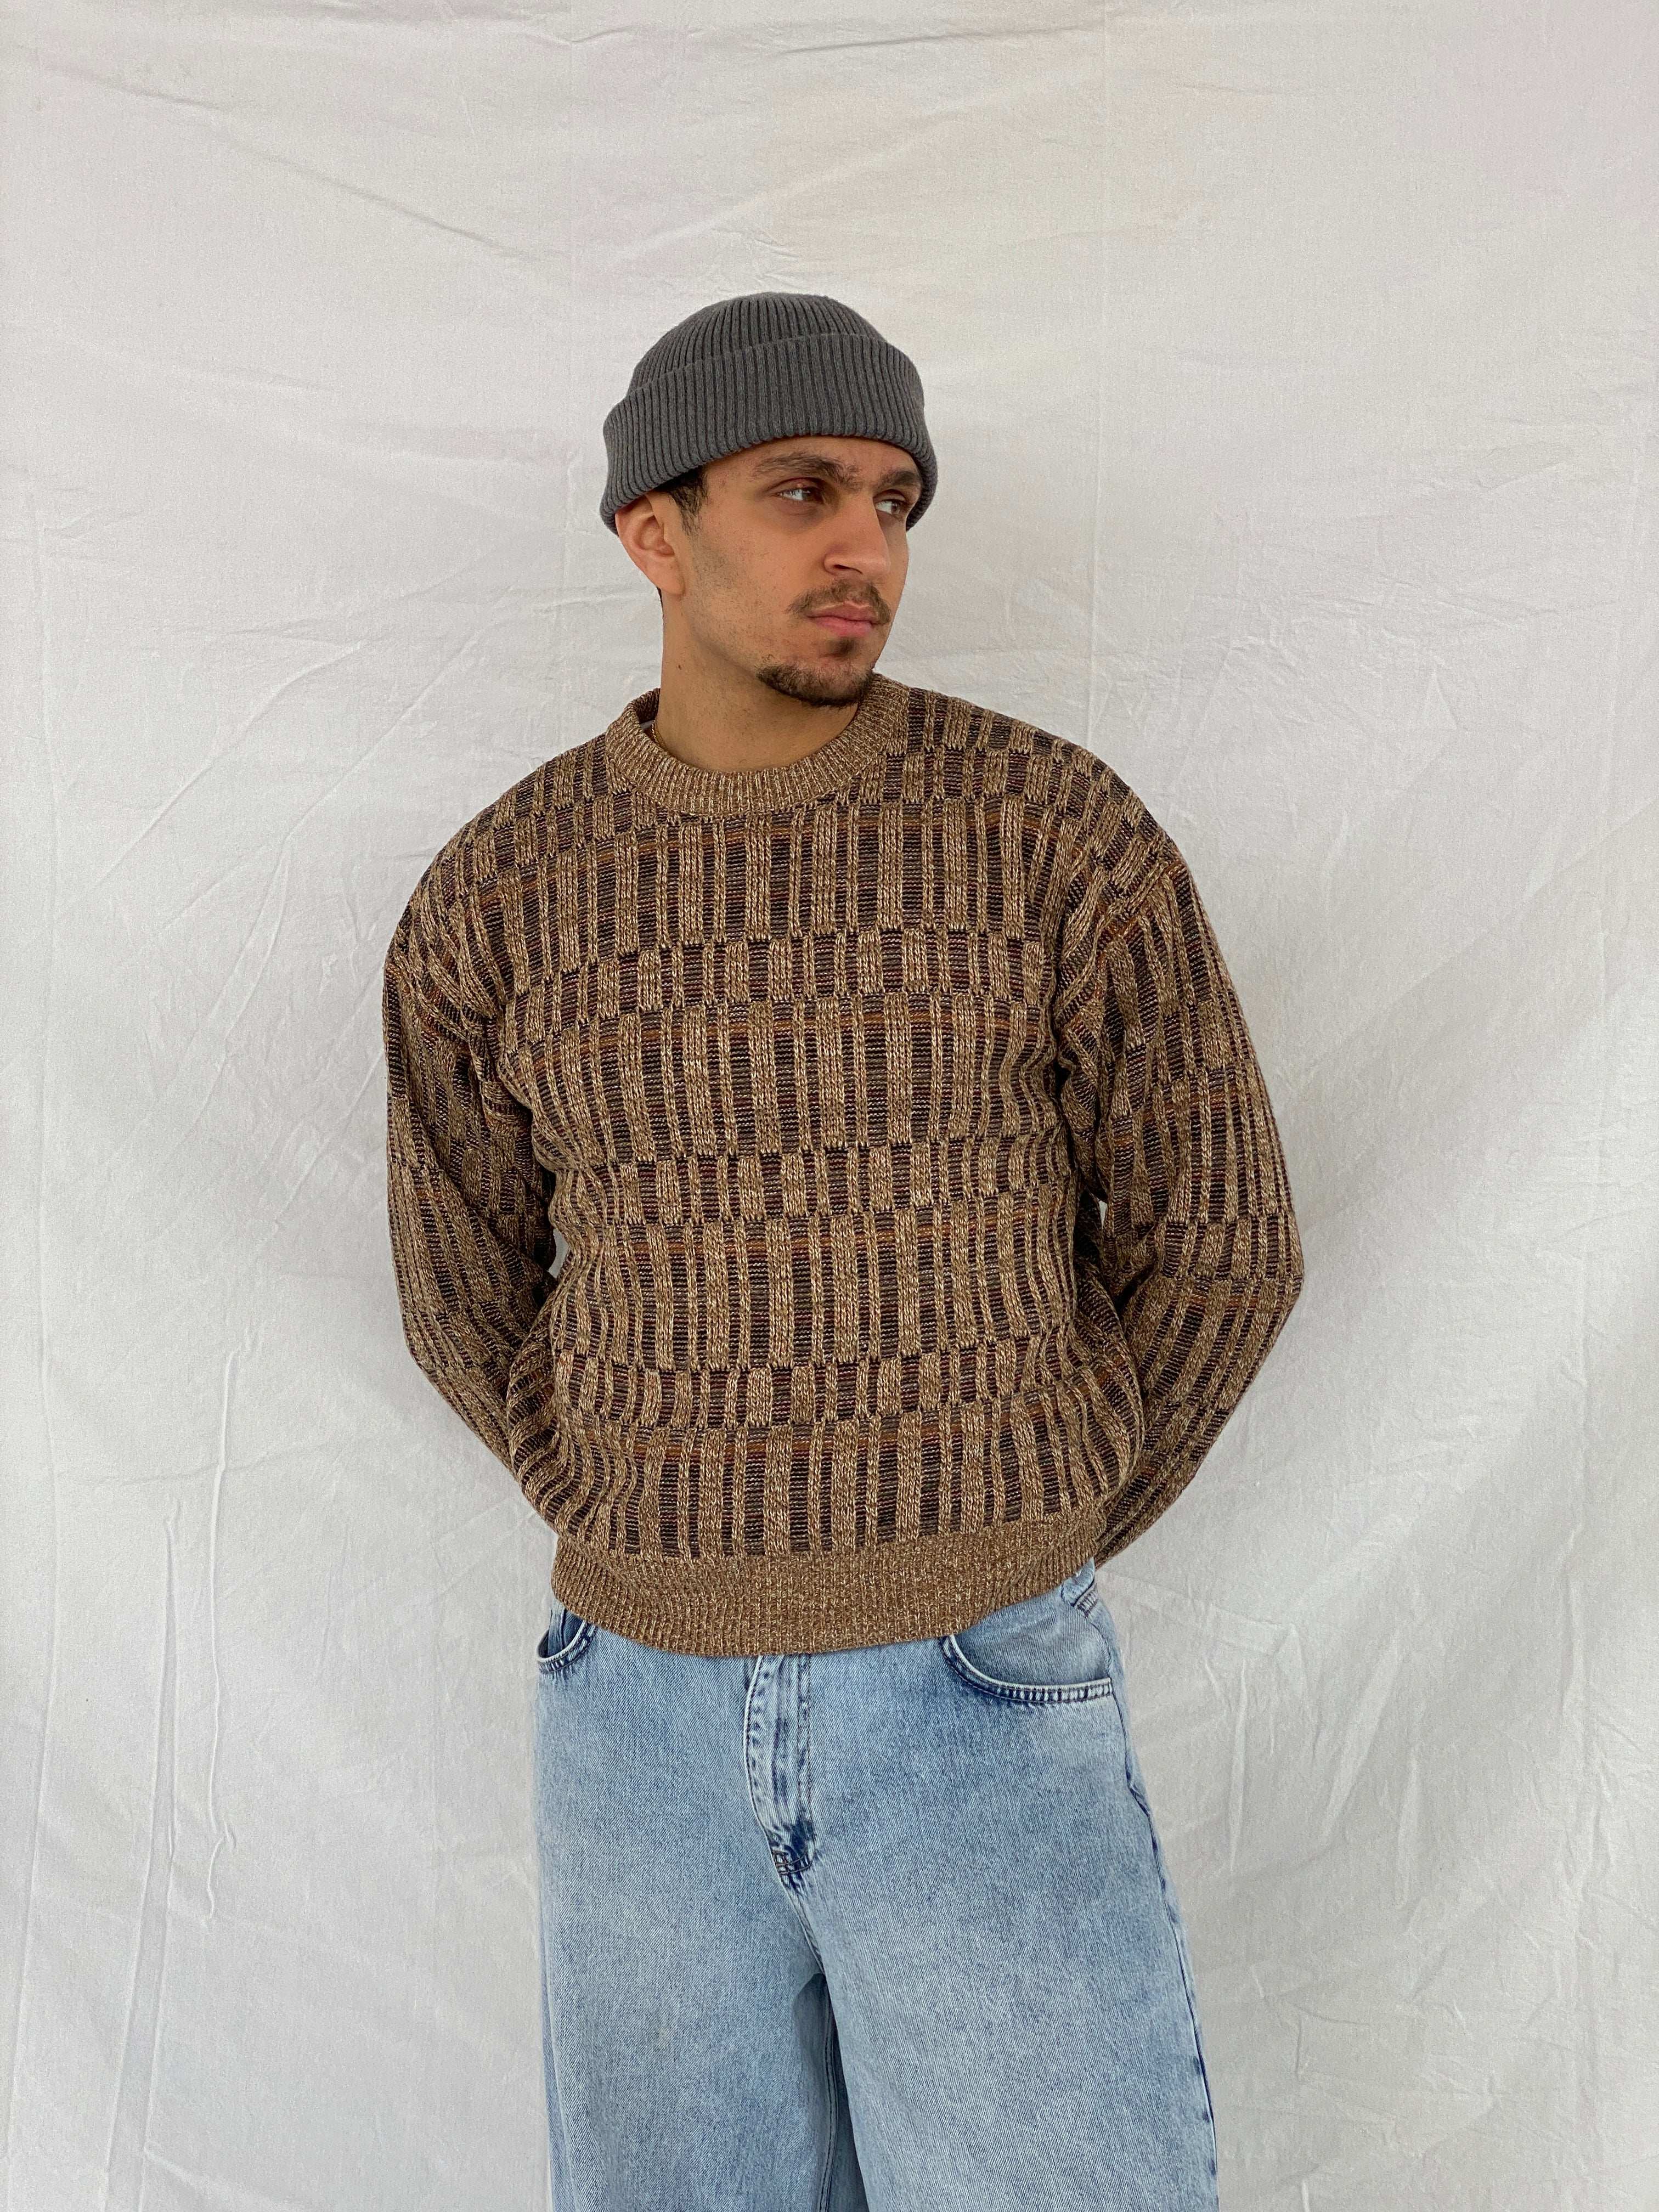 Vintage 90s David Taylor Beige And Brown Knitted Sweater - Size M - Balagan Vintage Sweater 80s, 90s, Abdullah, knitted sweater, sweater